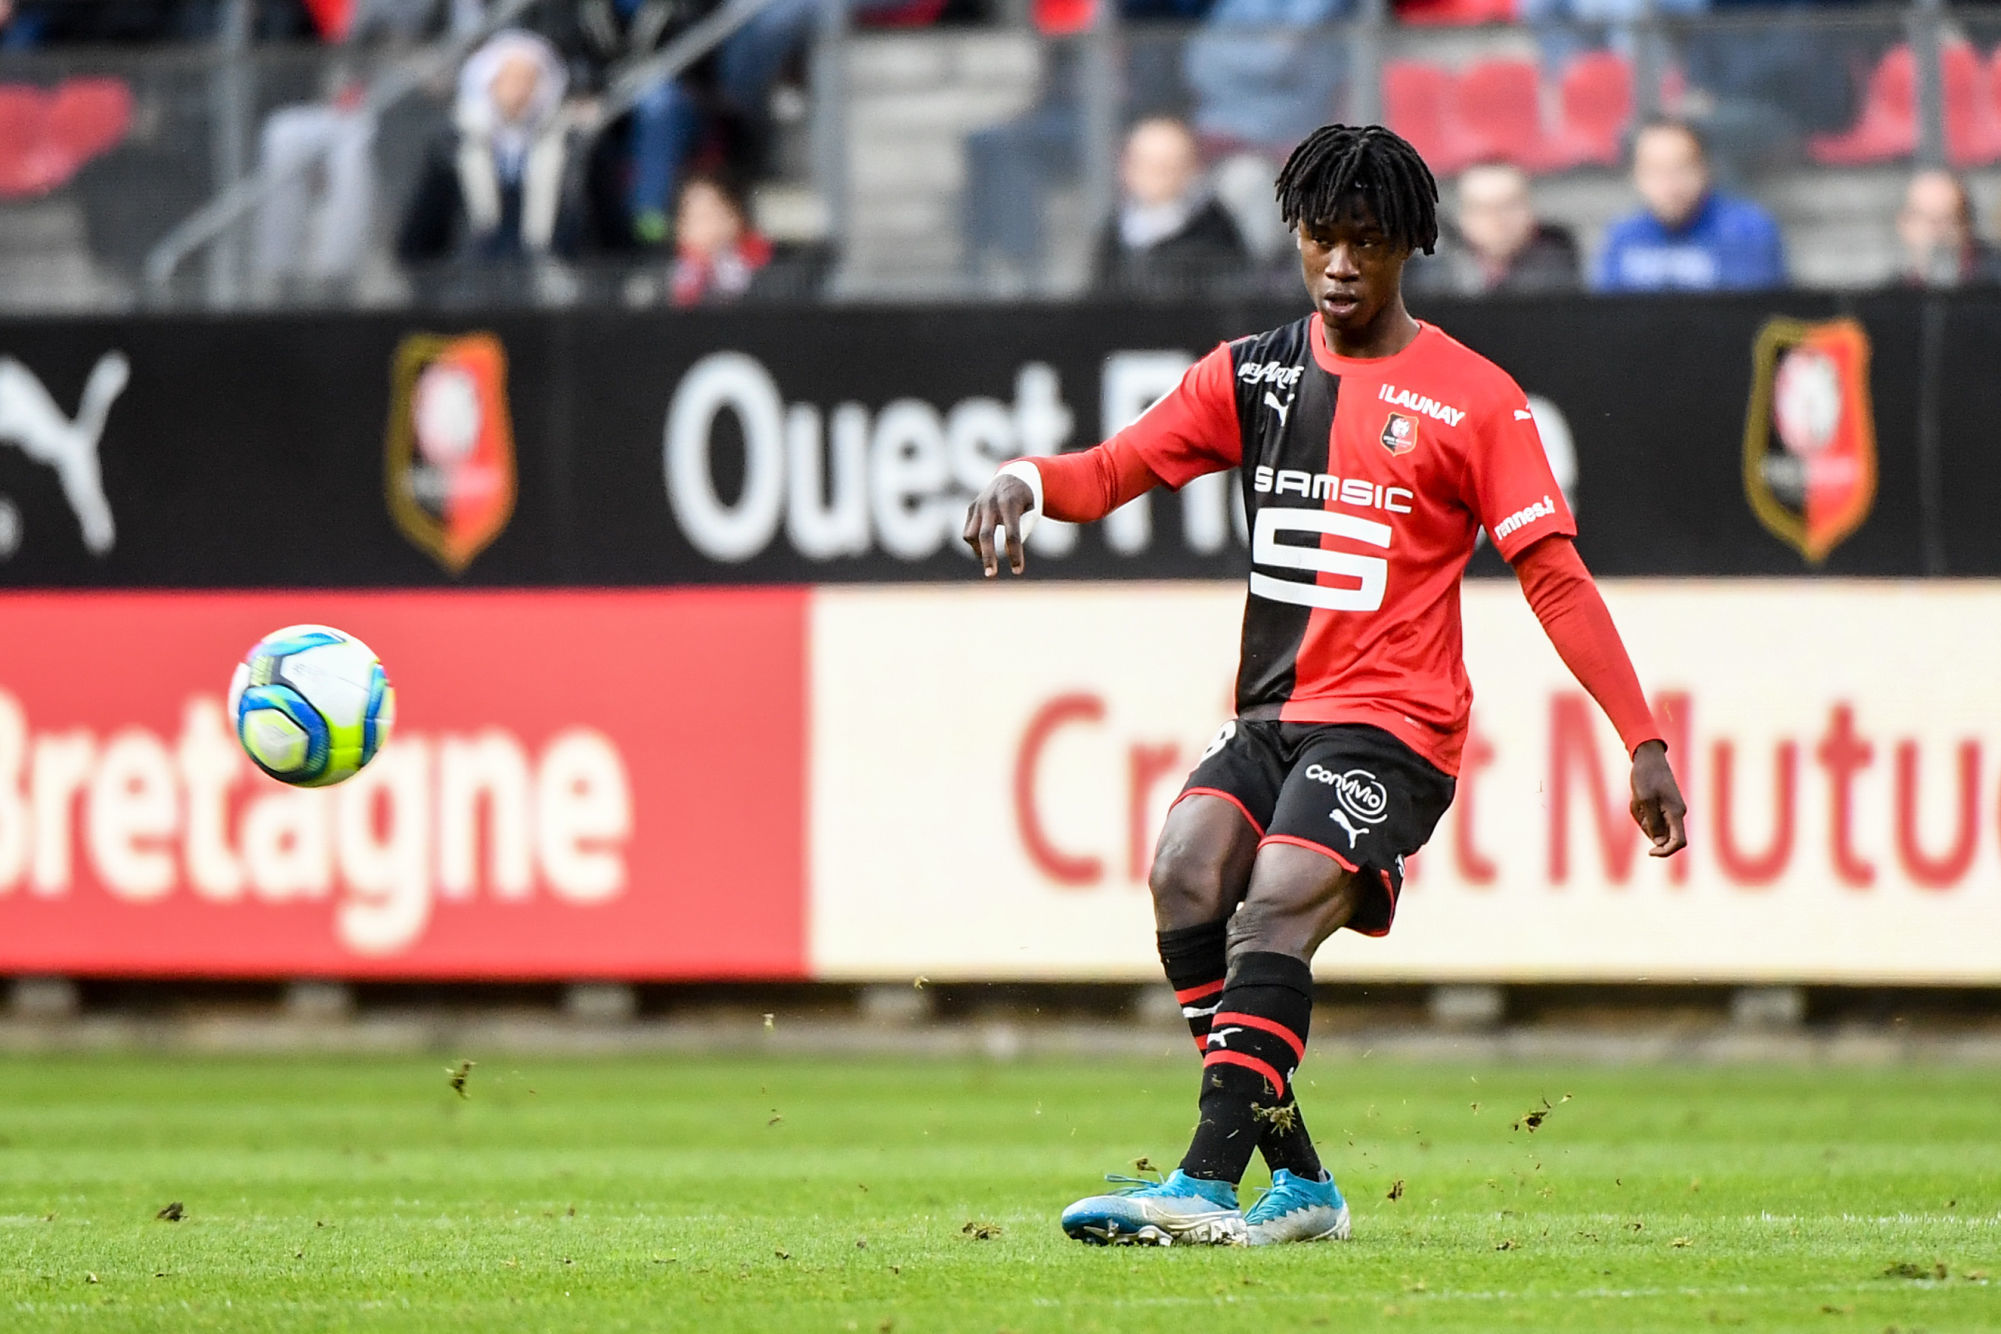 Edouardo CAMAVINGA of Rennes during the Ligue 1 match between Rennes and Amiens at Roazhon Park on November 10, 2019 in Rennes, France. (Photo by Anthony Dibon/Icon Sport) - Edouardo CAMAVINGA - Roazhon Park - Rennes (France)